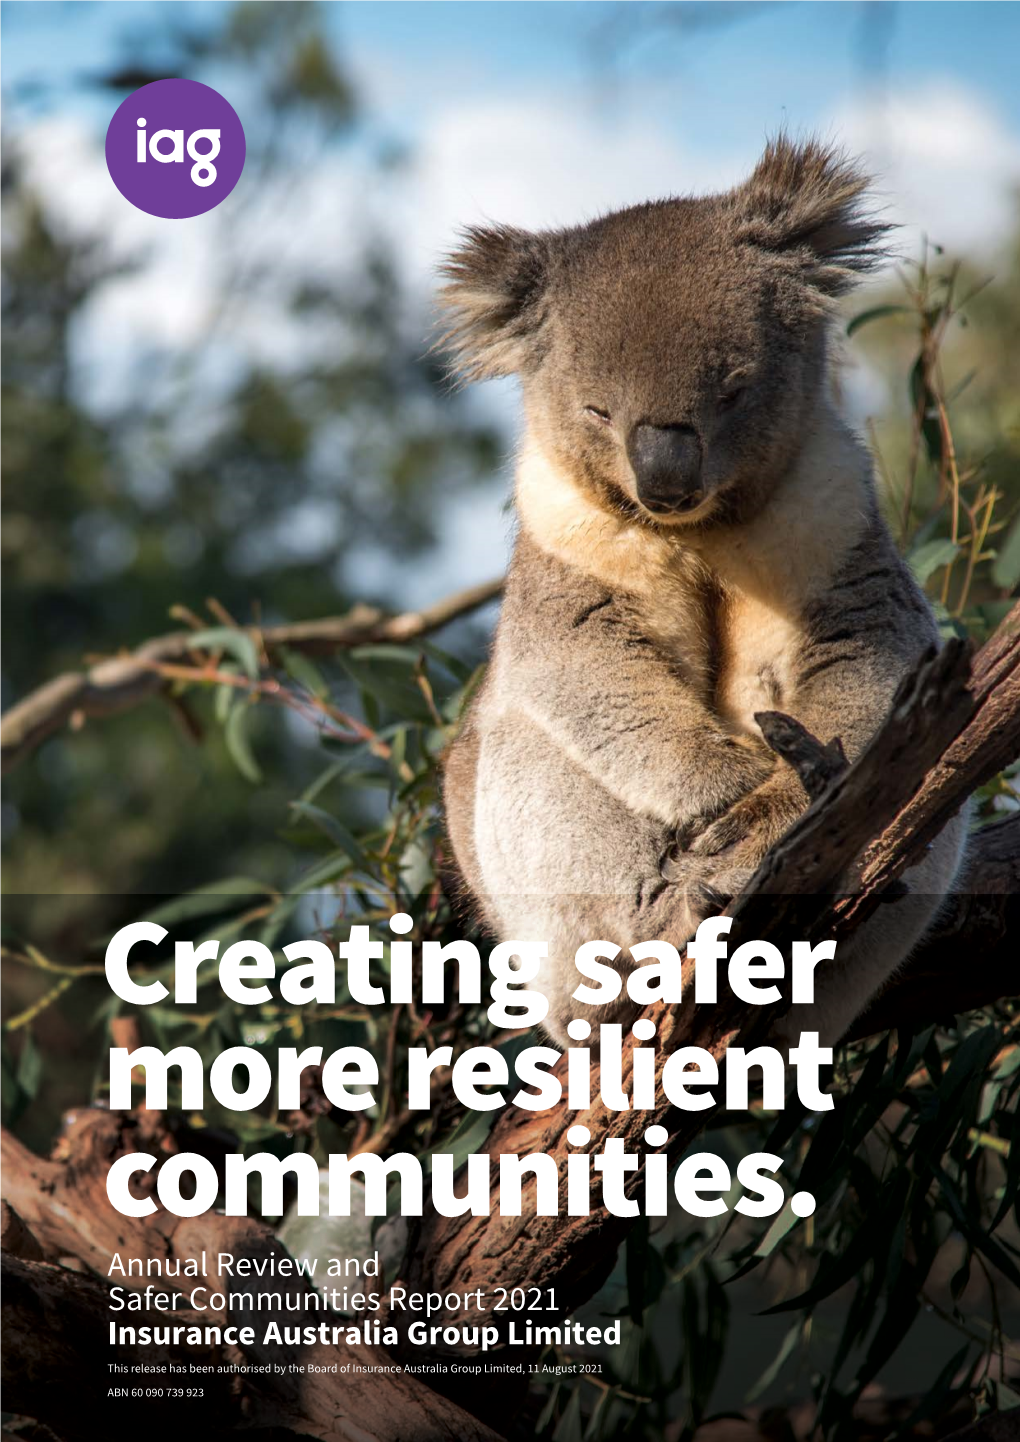 Annual Review and Safer Communities Report 2021